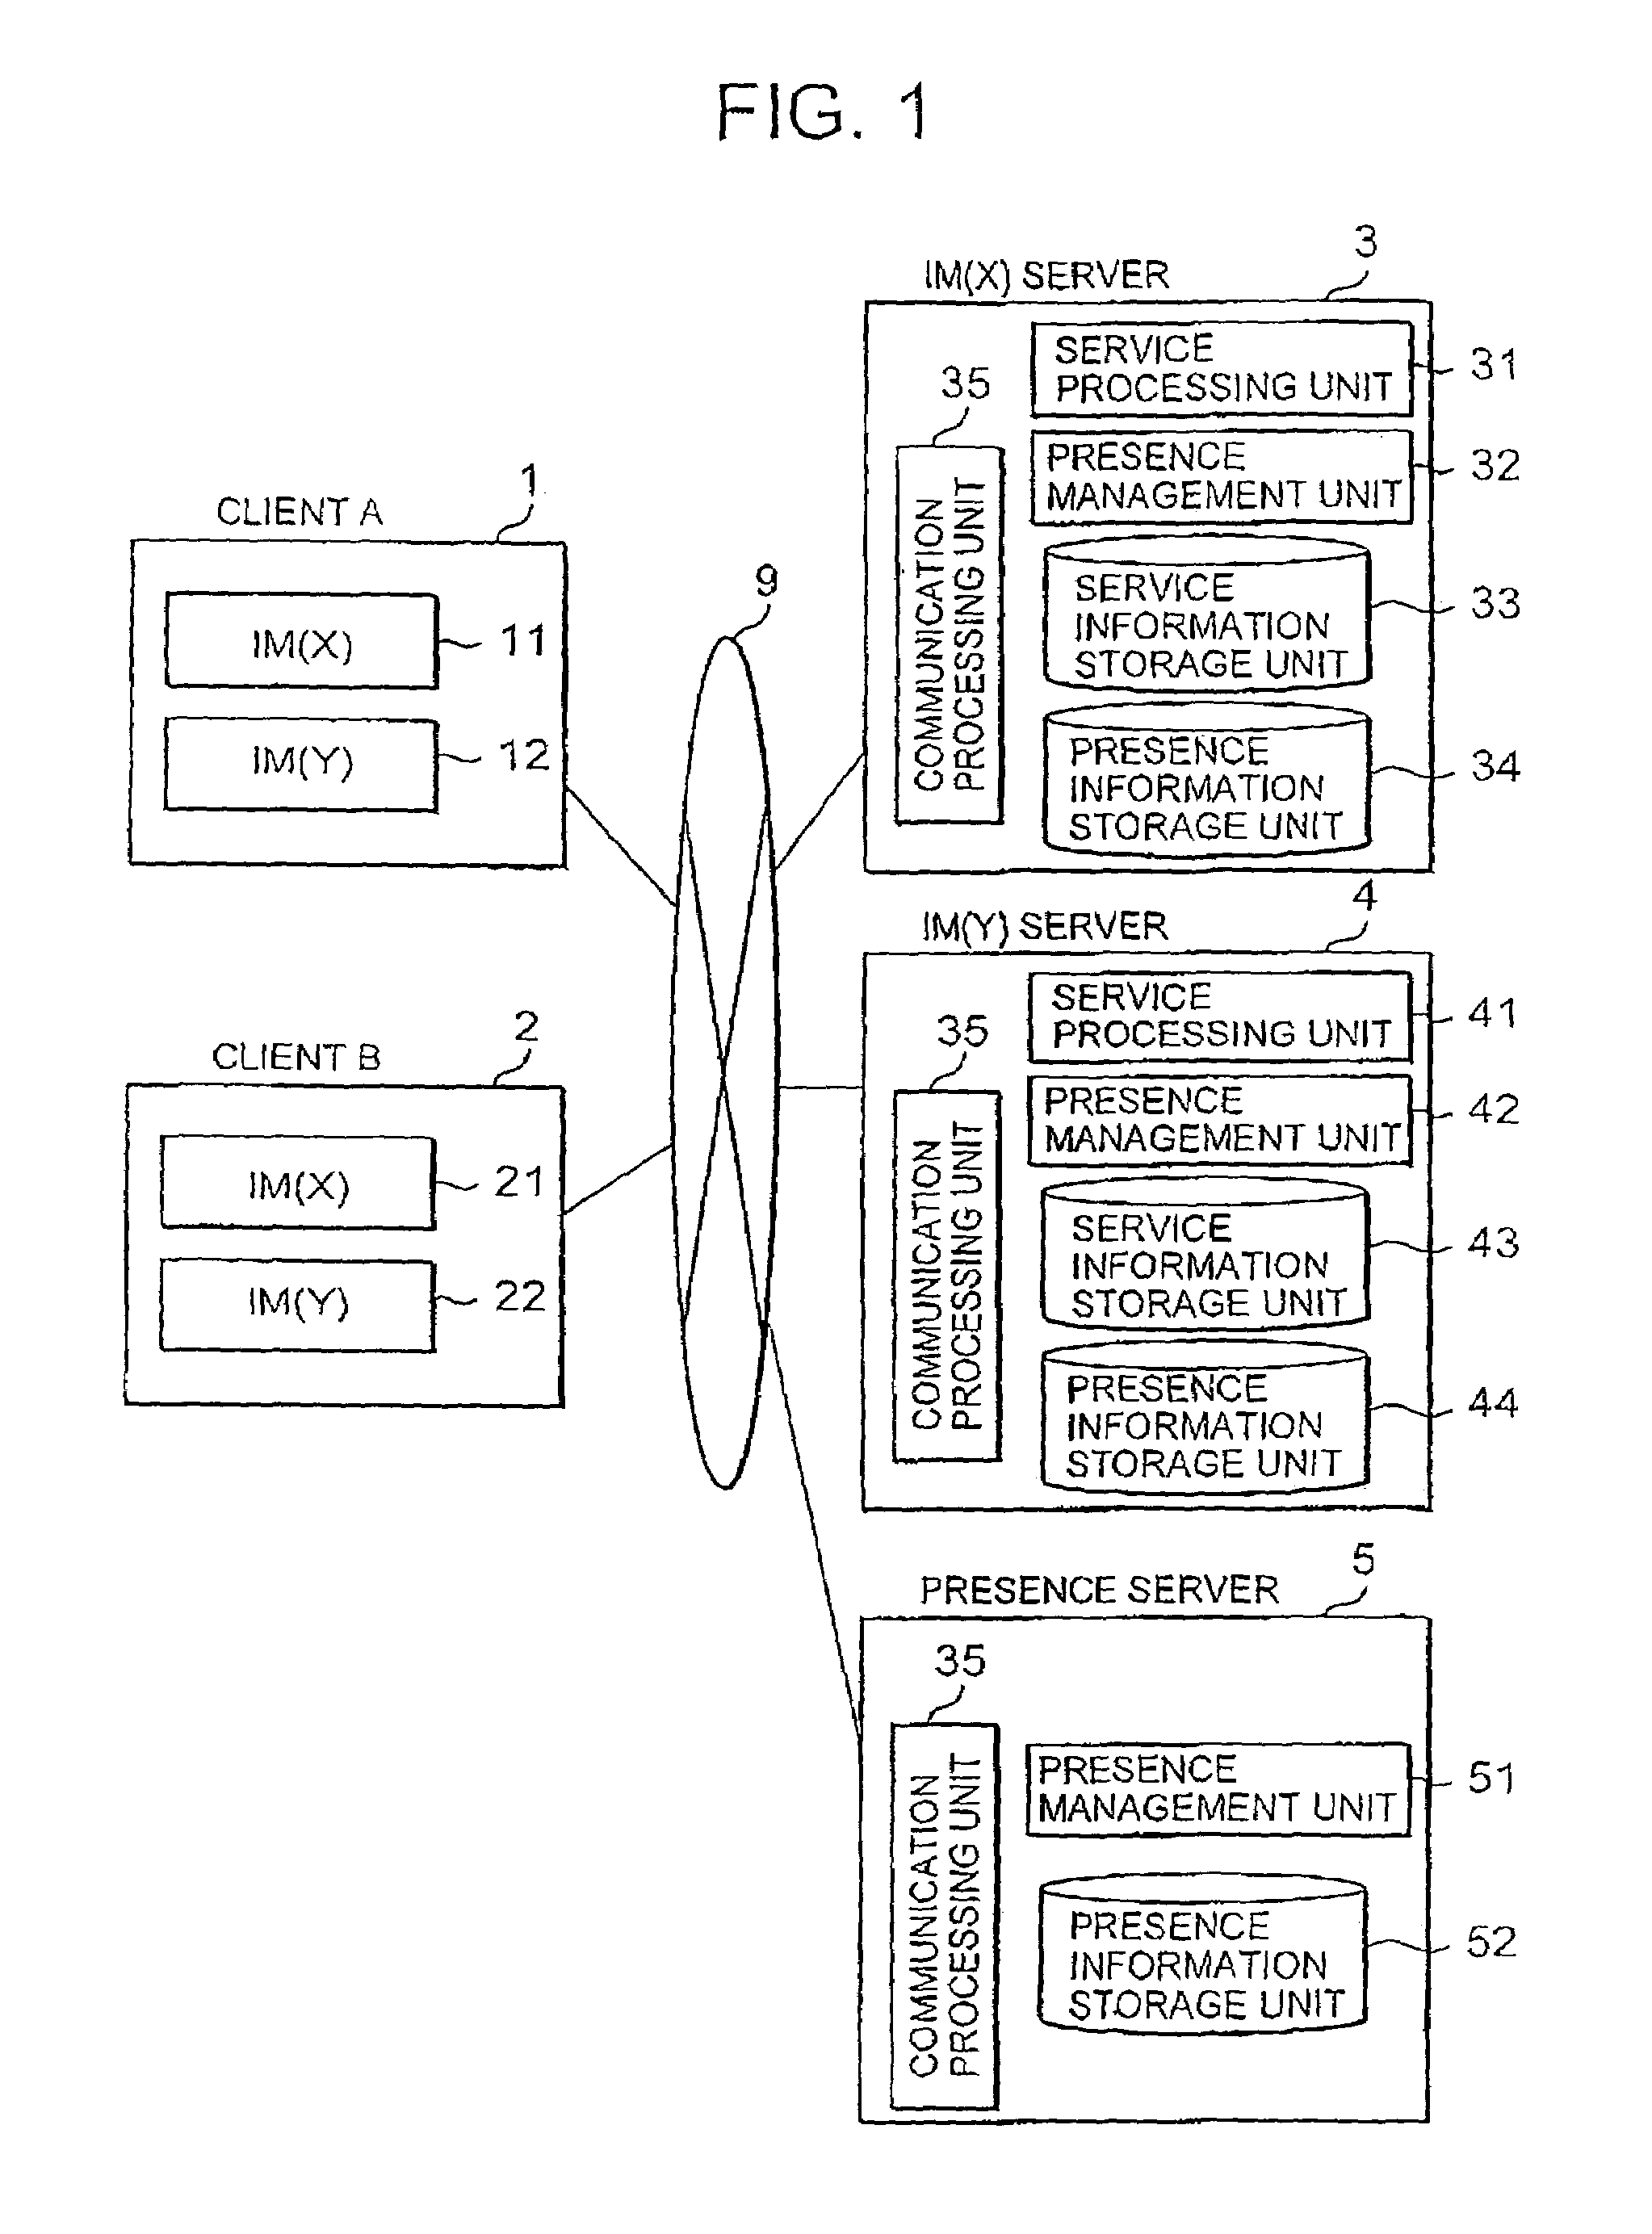 Presence information sharing method and system